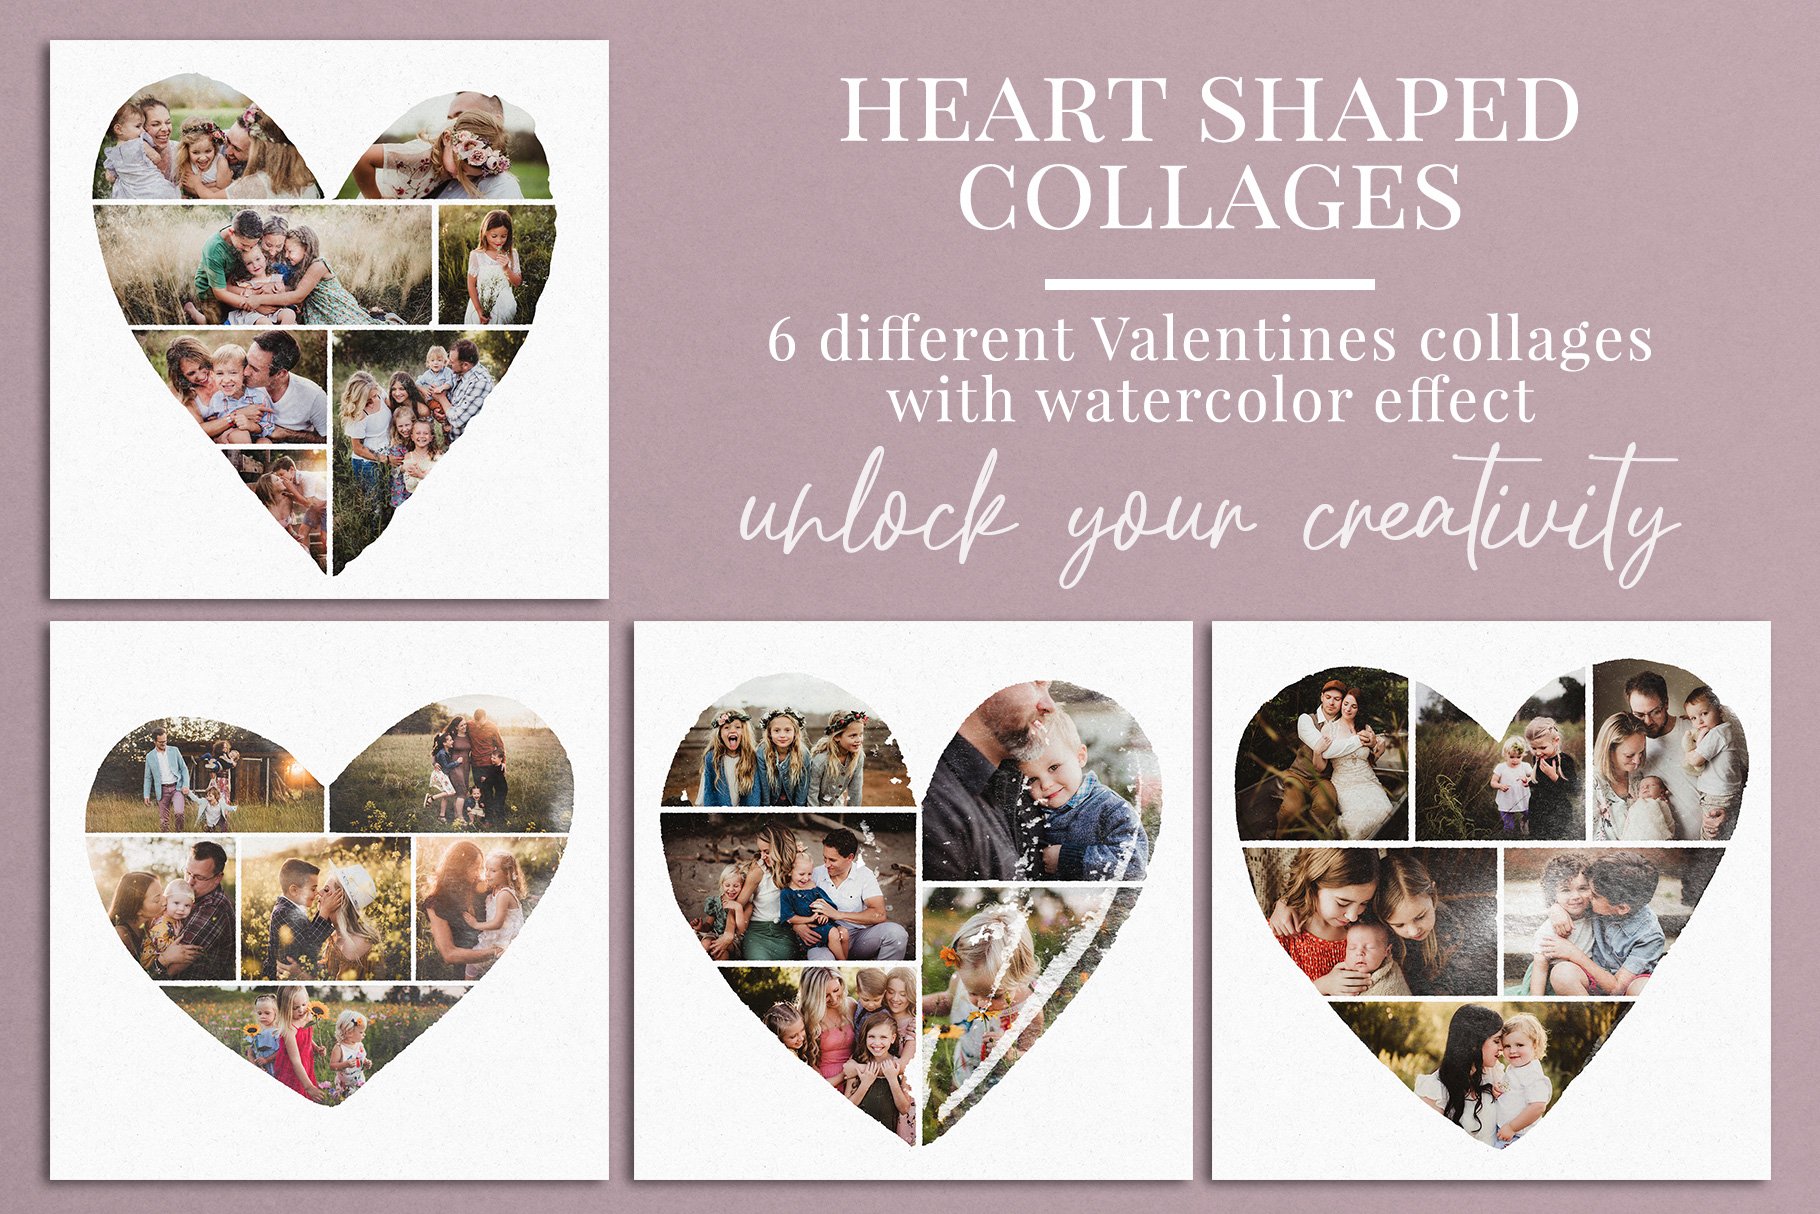 Heart Shaped Collage with watercolorcover image.